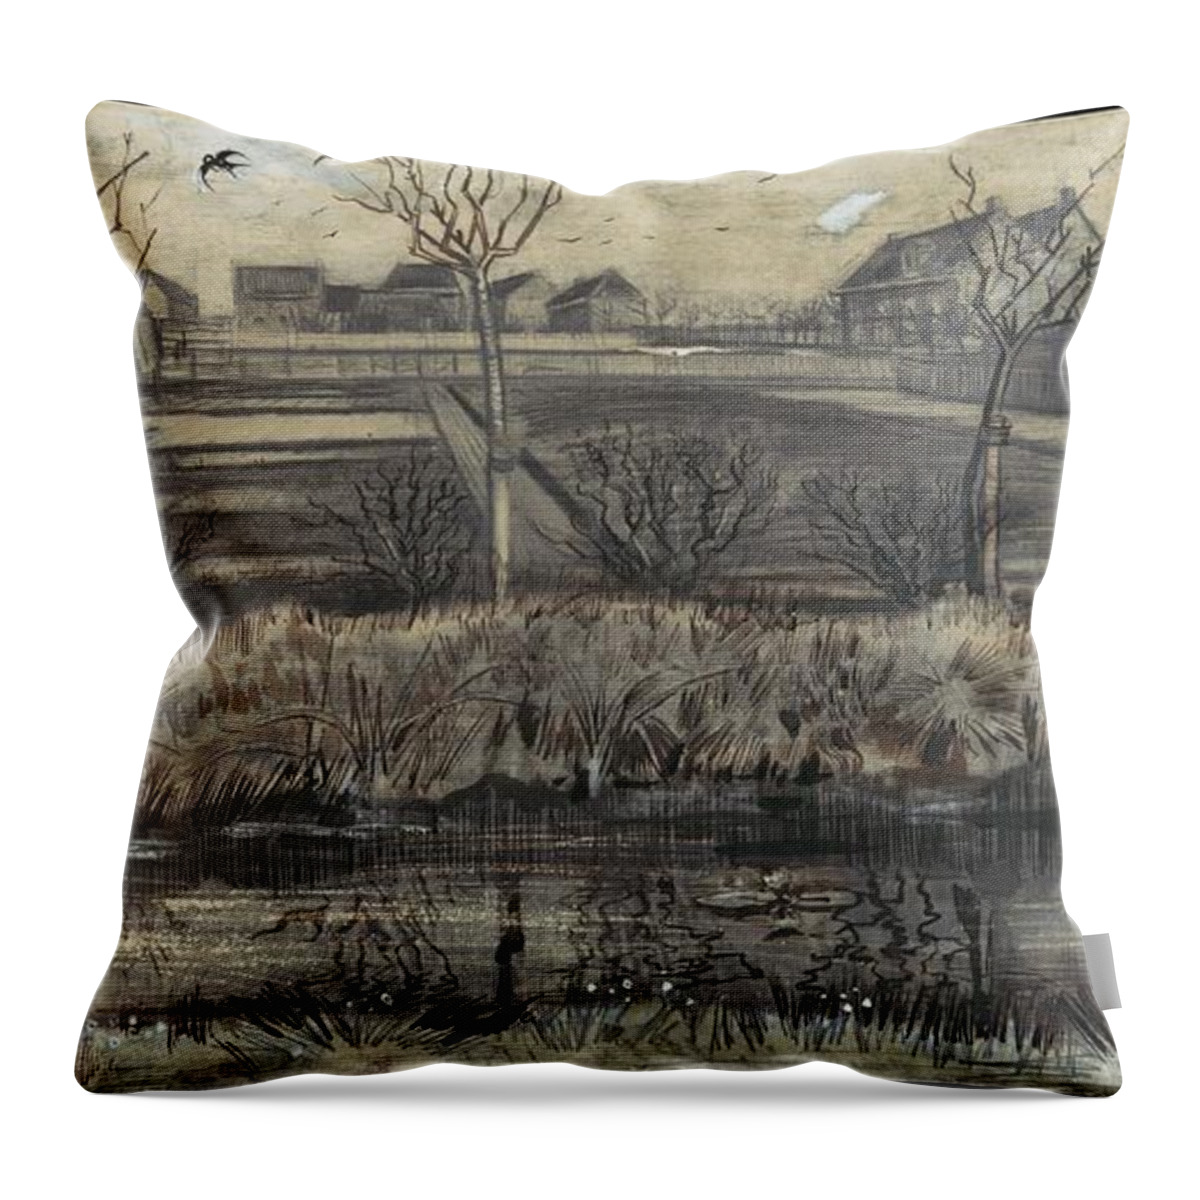 Vincent Van Gogh Throw Pillow featuring the painting Nursery on Schenkweg by MotionAge Designs